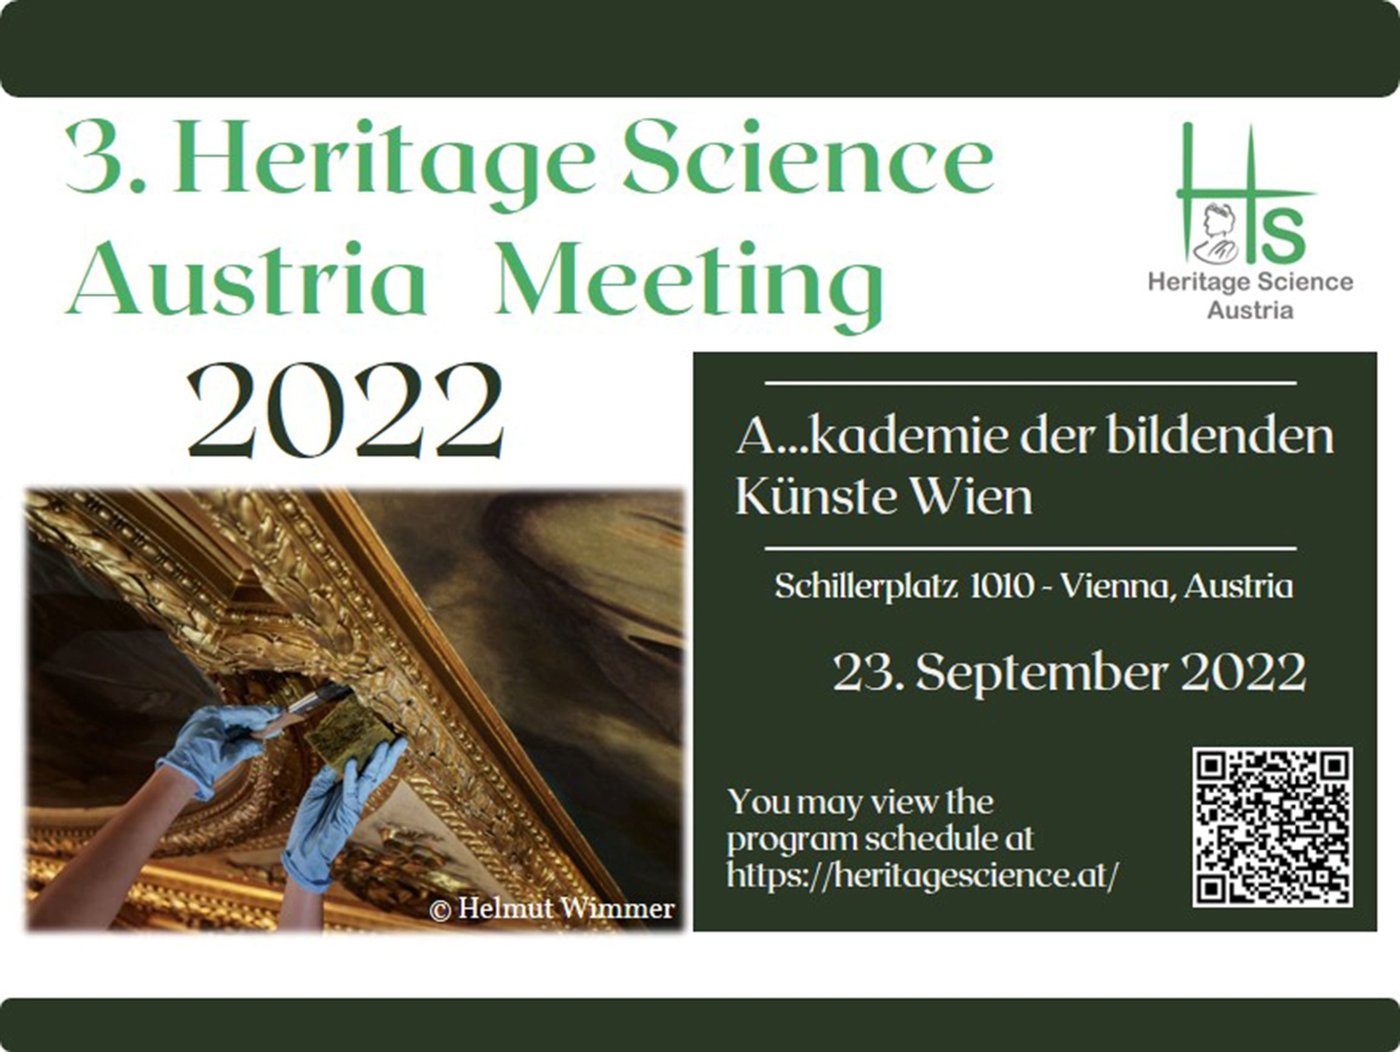 The image shows the conference flyer in which the announcement of the conference is written, taking place on the 23rd September 2022 at the Academy of Fine Arts Vienna Schillerplatz 3, 1010 Vienna. Further information is given on the official website: heritagescience.at